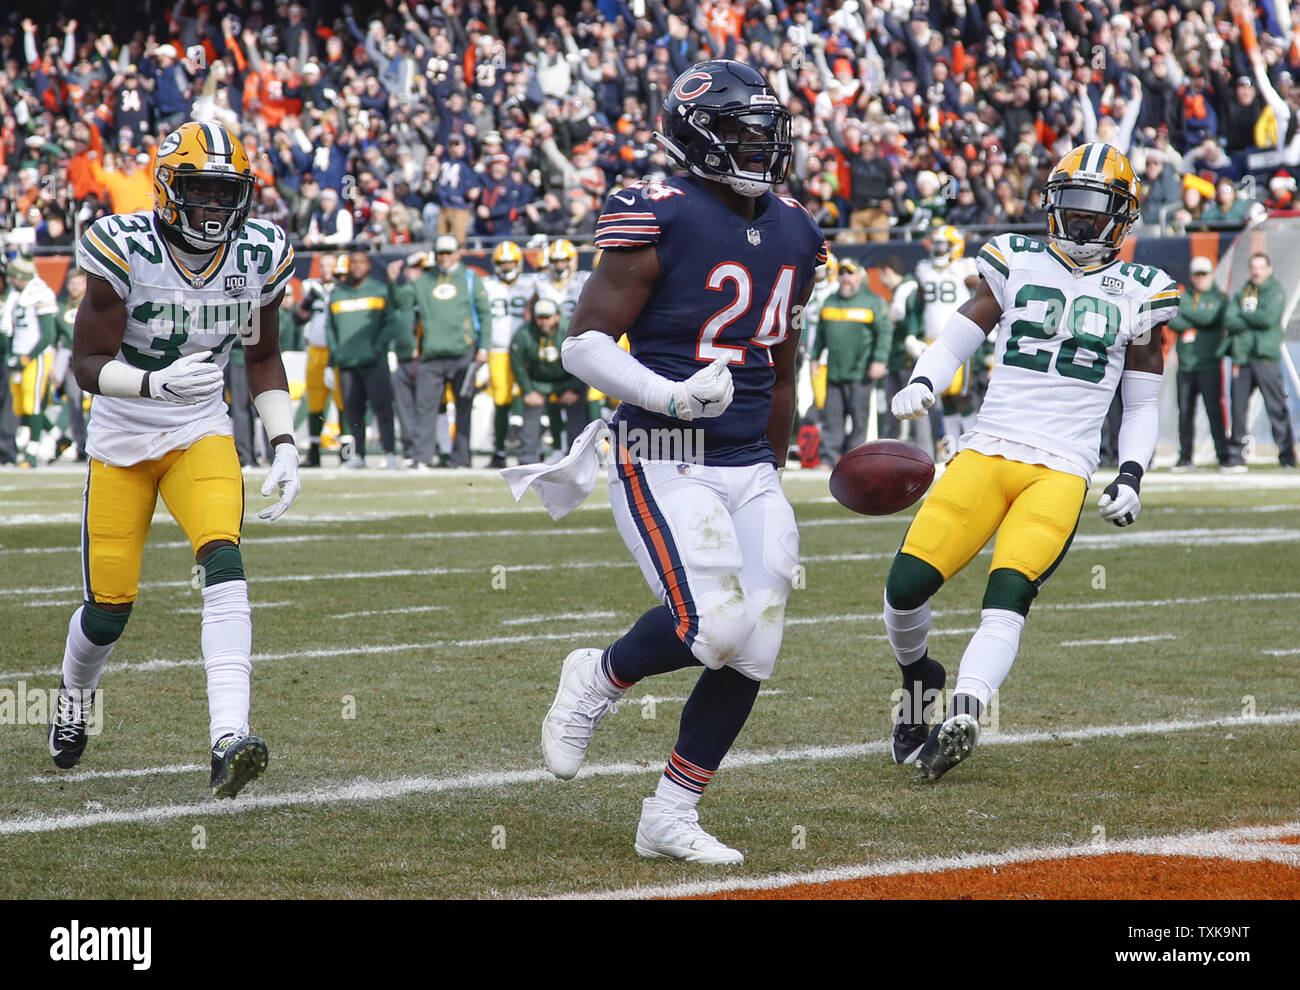 Chicago Bears running back Jordan Howard (24) reacts after scoring a touchdown against the Green Bay Packers during the first half at Soldier Field in Chicago on December 16, 2018. Photo by Kamil Krzaczynski/UPI Stock Photo